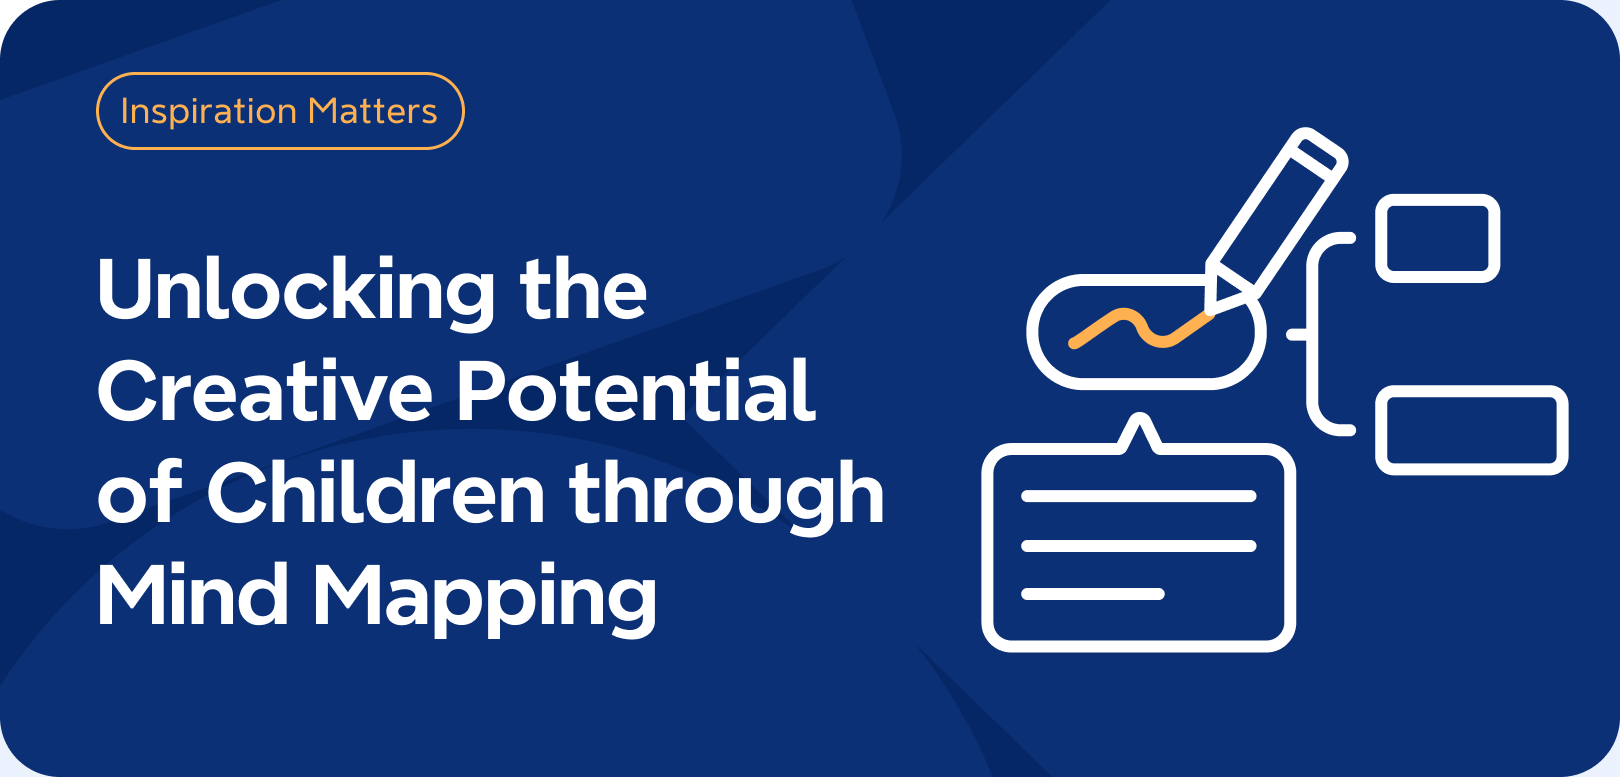 Creativity is a vital skill for the 21st century, but how can we foster it in our children? In this webinar, you will learn how mind mapping can boost your child’s creativity, learning, and thinking skills.